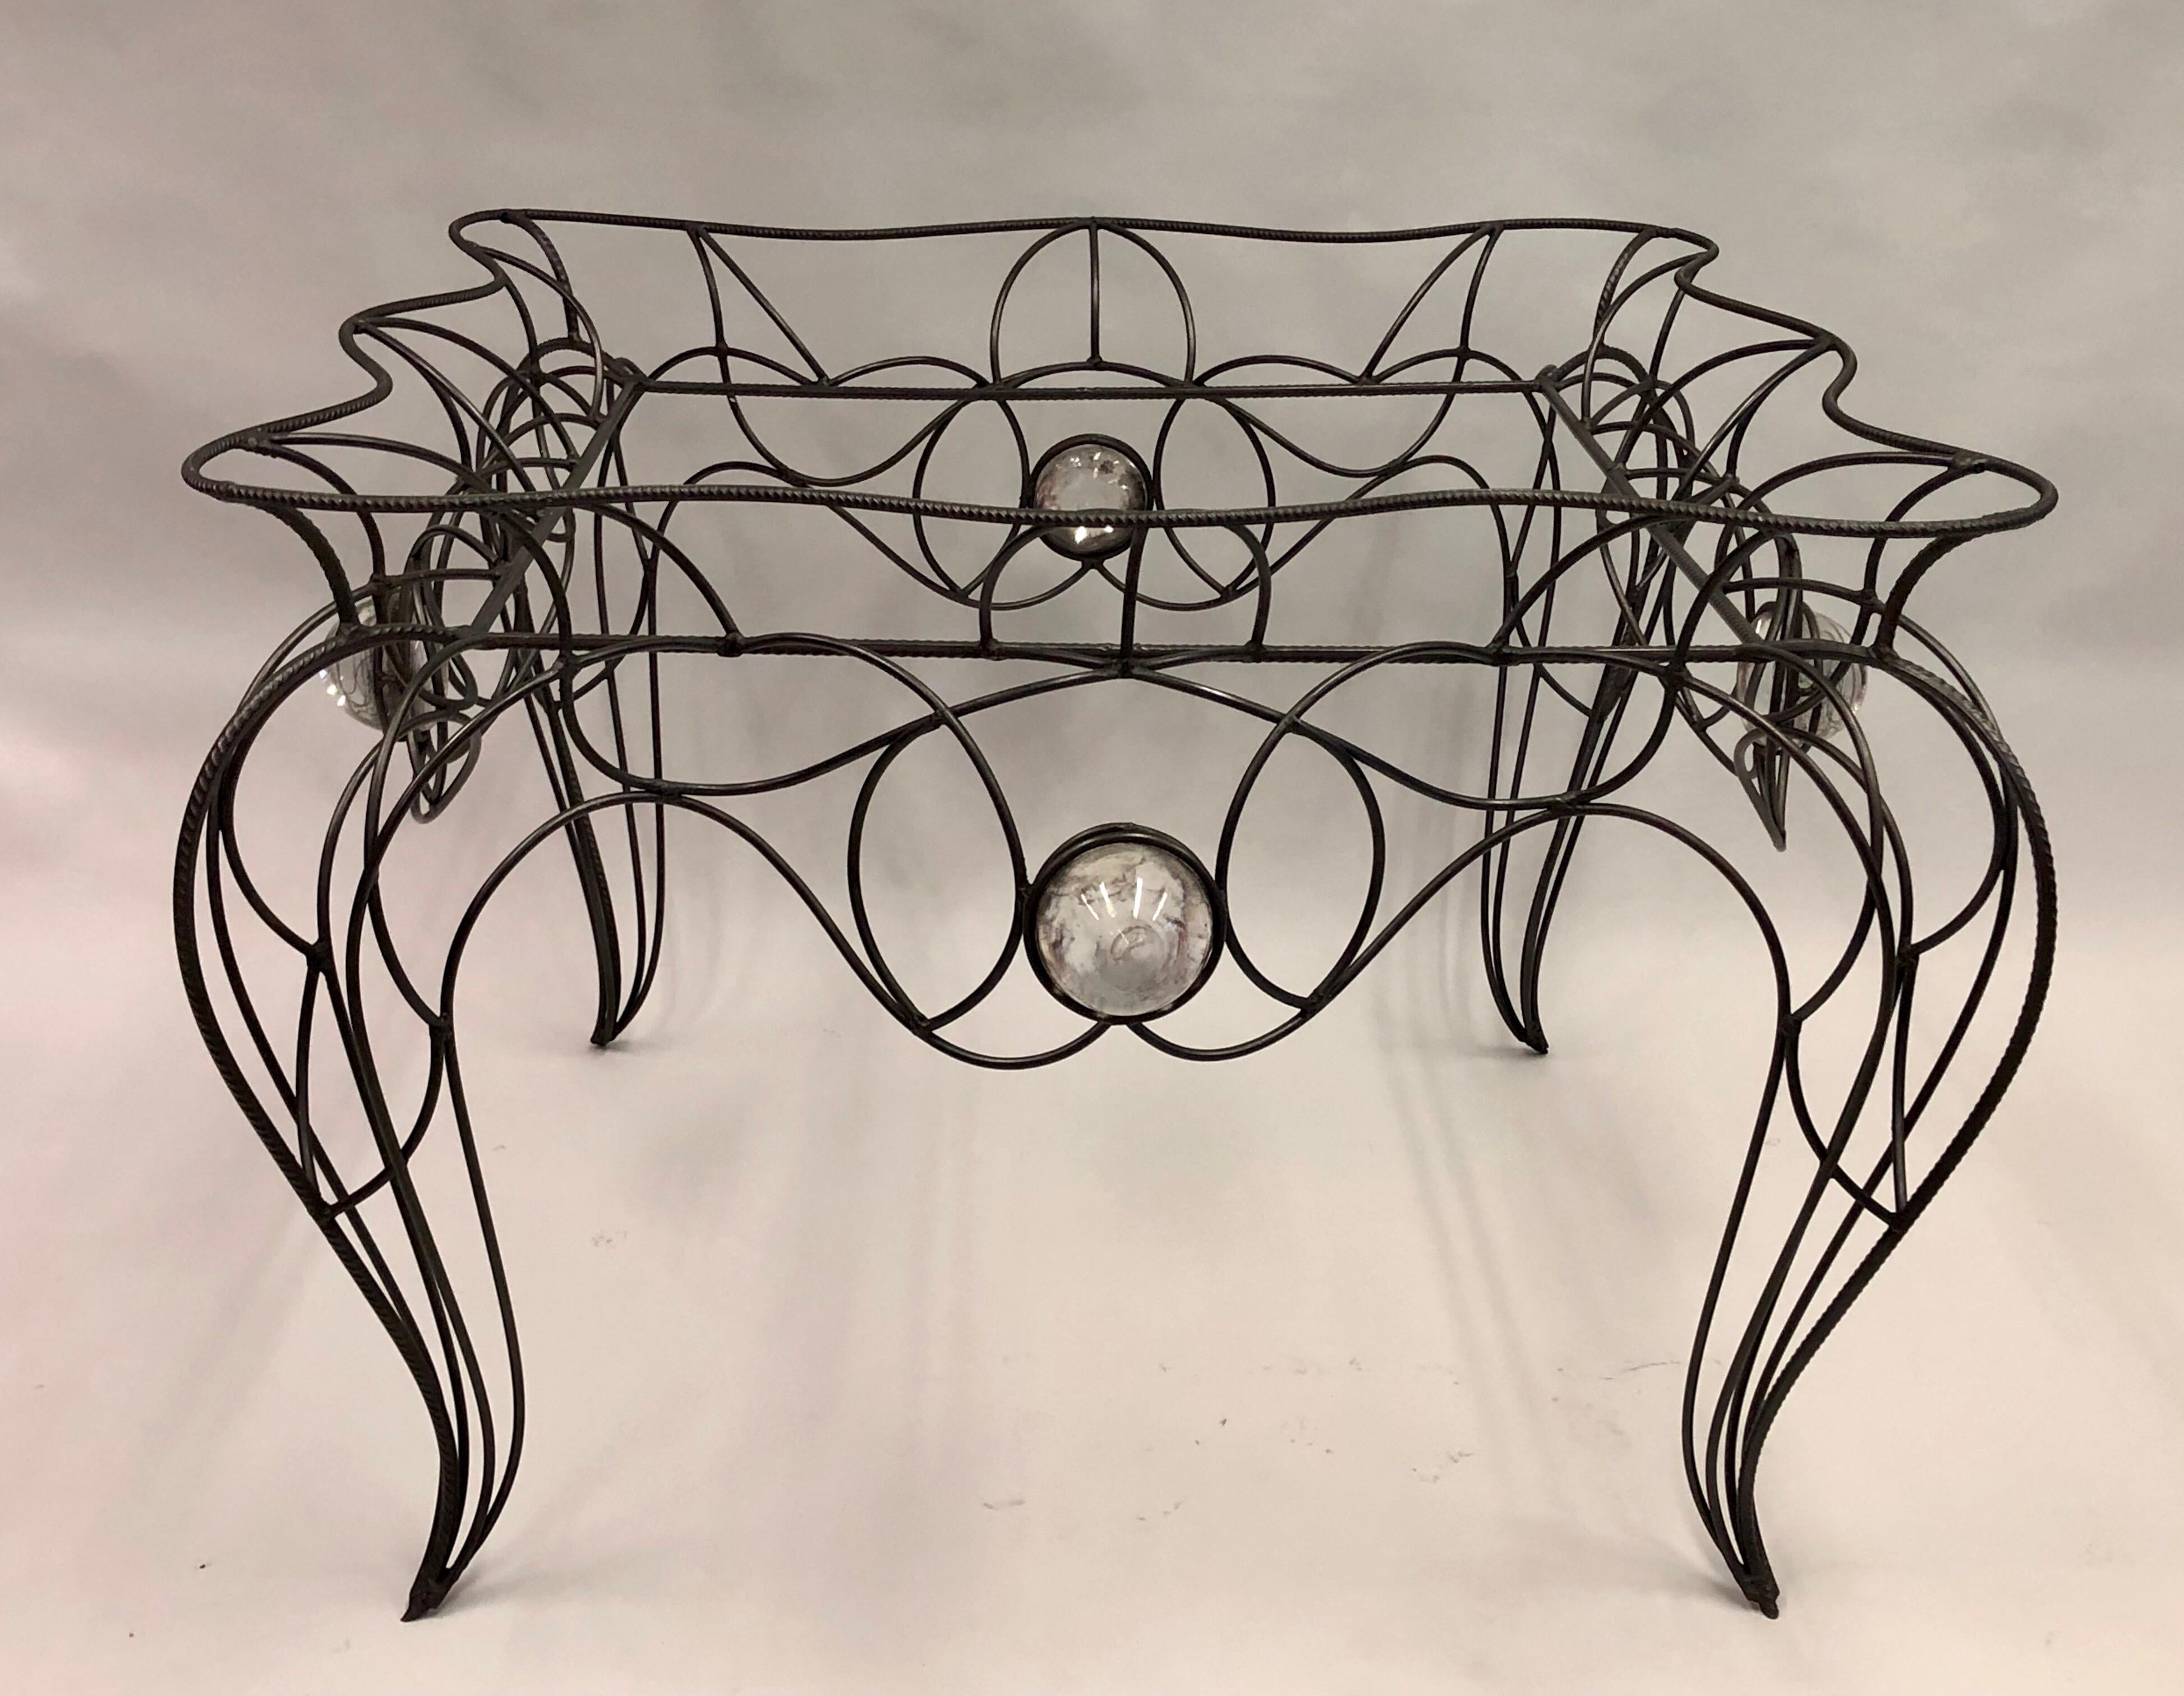 A unique, early, handmade piece by Andre Dubreuil.

Handwrought iron frame with four inset hand blown glass balls supporting a serpentine hand painted wood and gesso top.

Literature: 
Andre Dubreuil, Poete du Fer, Editions Norma, Paris, 2006,